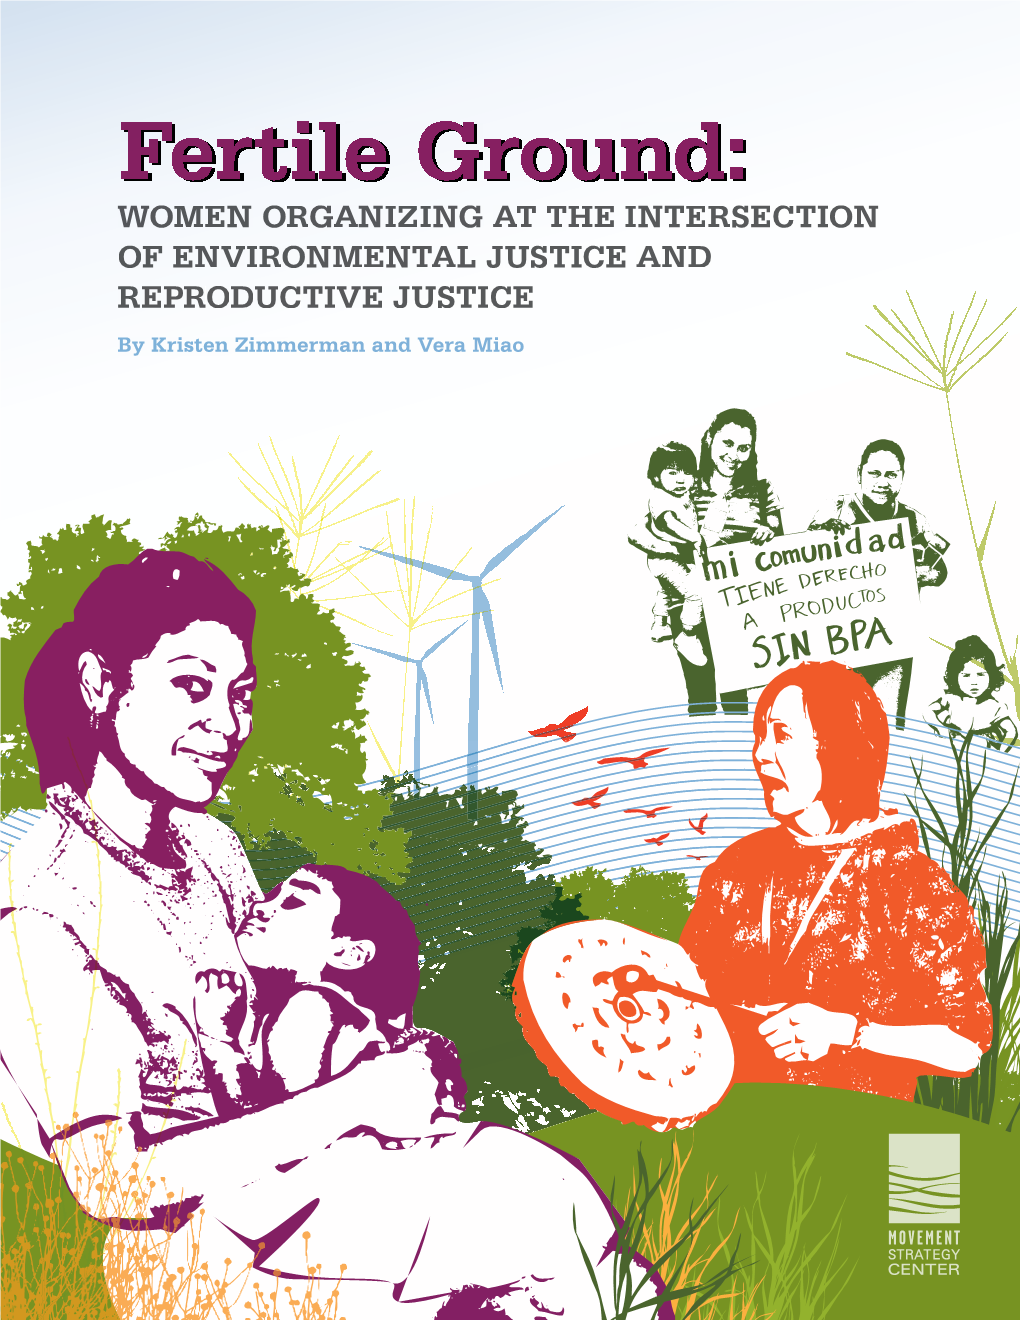 Fertile Ground: Women Organizing at the Intersection of Environmental Justice and Reproductive Justice